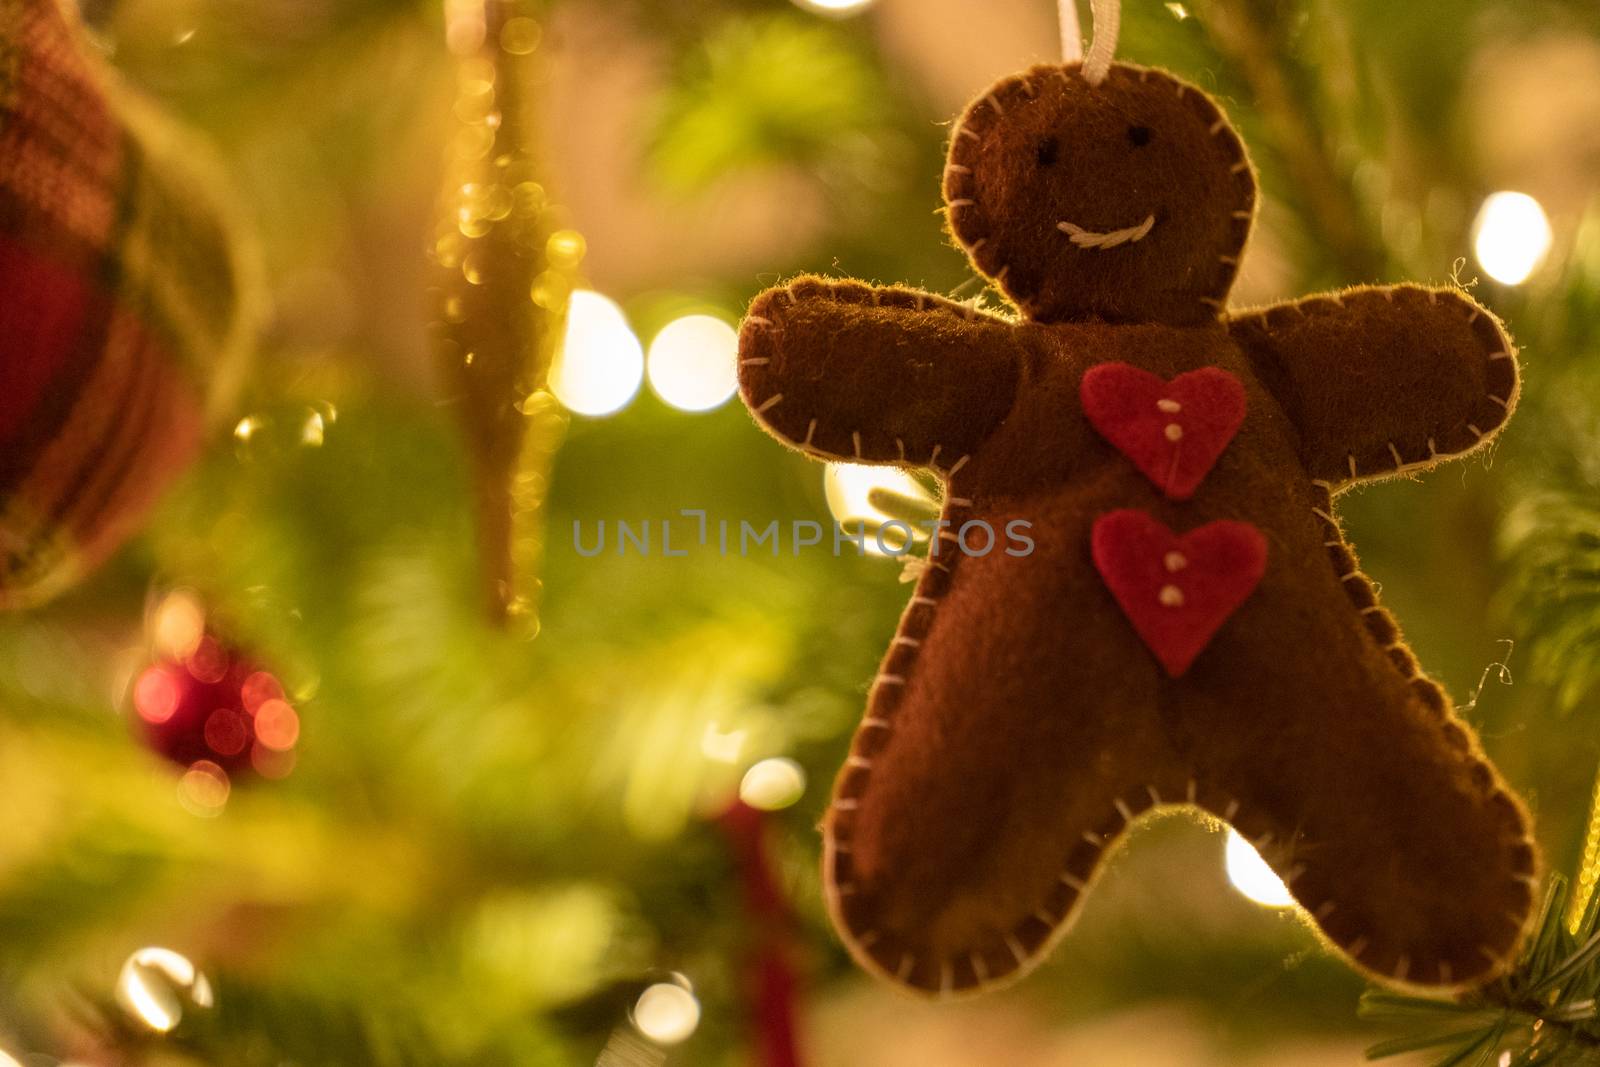 Gingerbread Man Christmas Decoration by samULvisuals